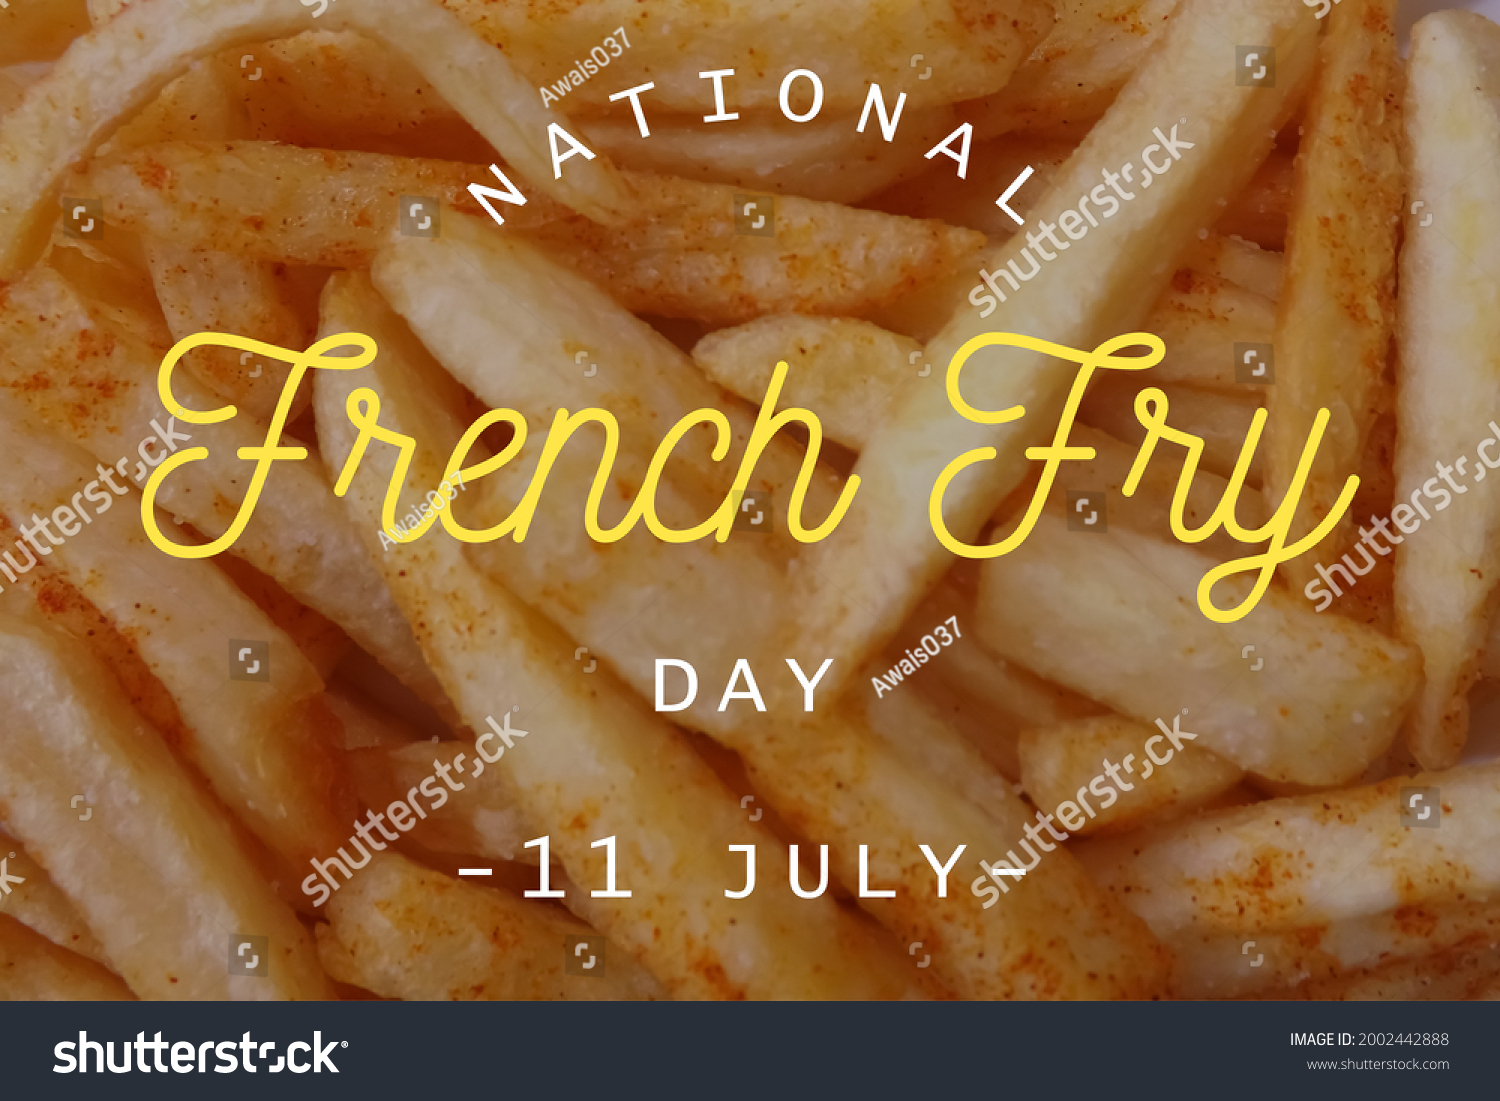 539 National french fries day Images, Stock Photos & Vectors Shutterstock